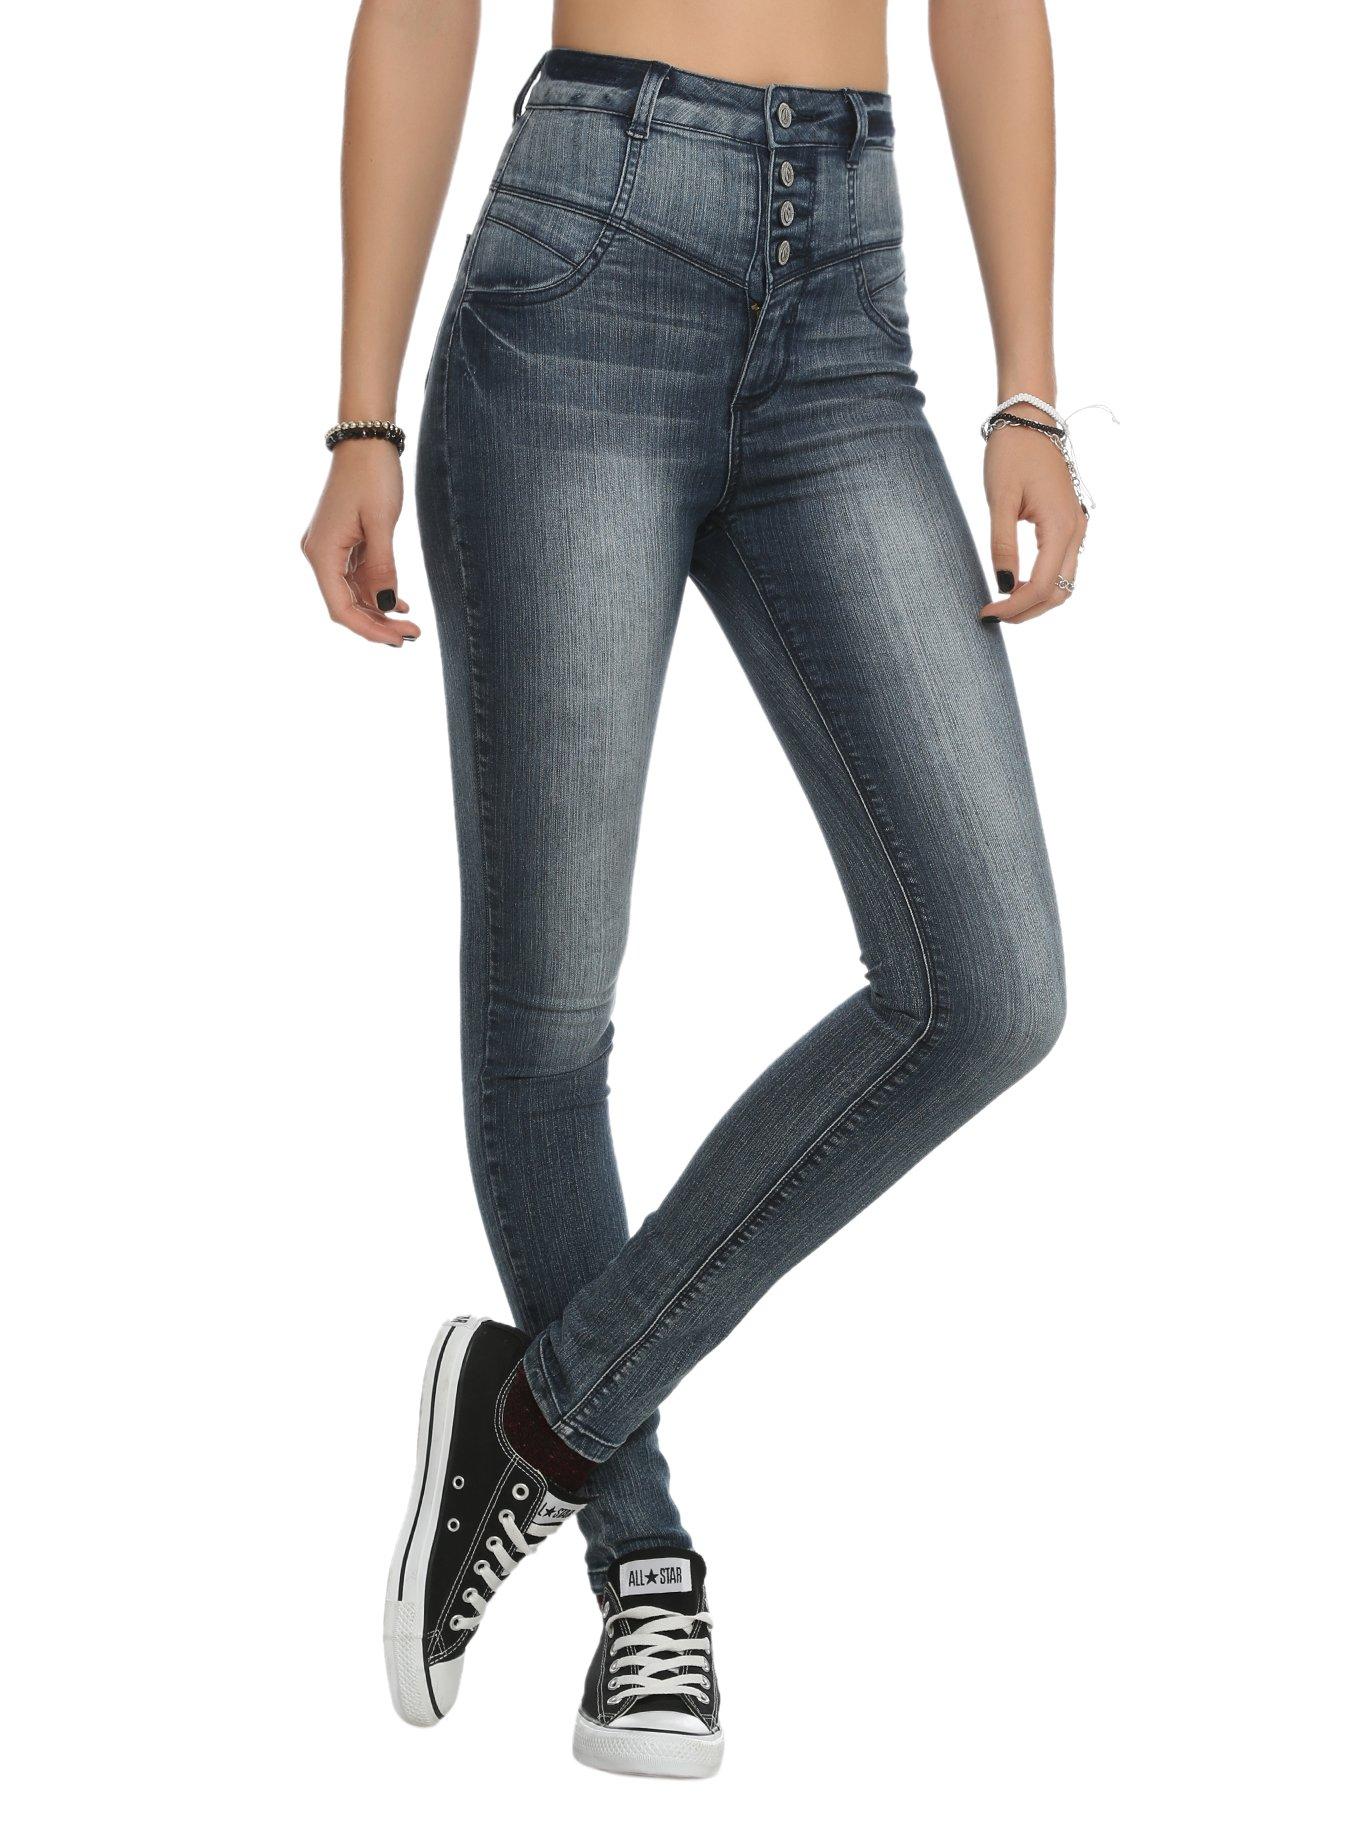 Cello Medium Blue 4-Button High-Waisted Skinny Jeans, BLACK, hi-res